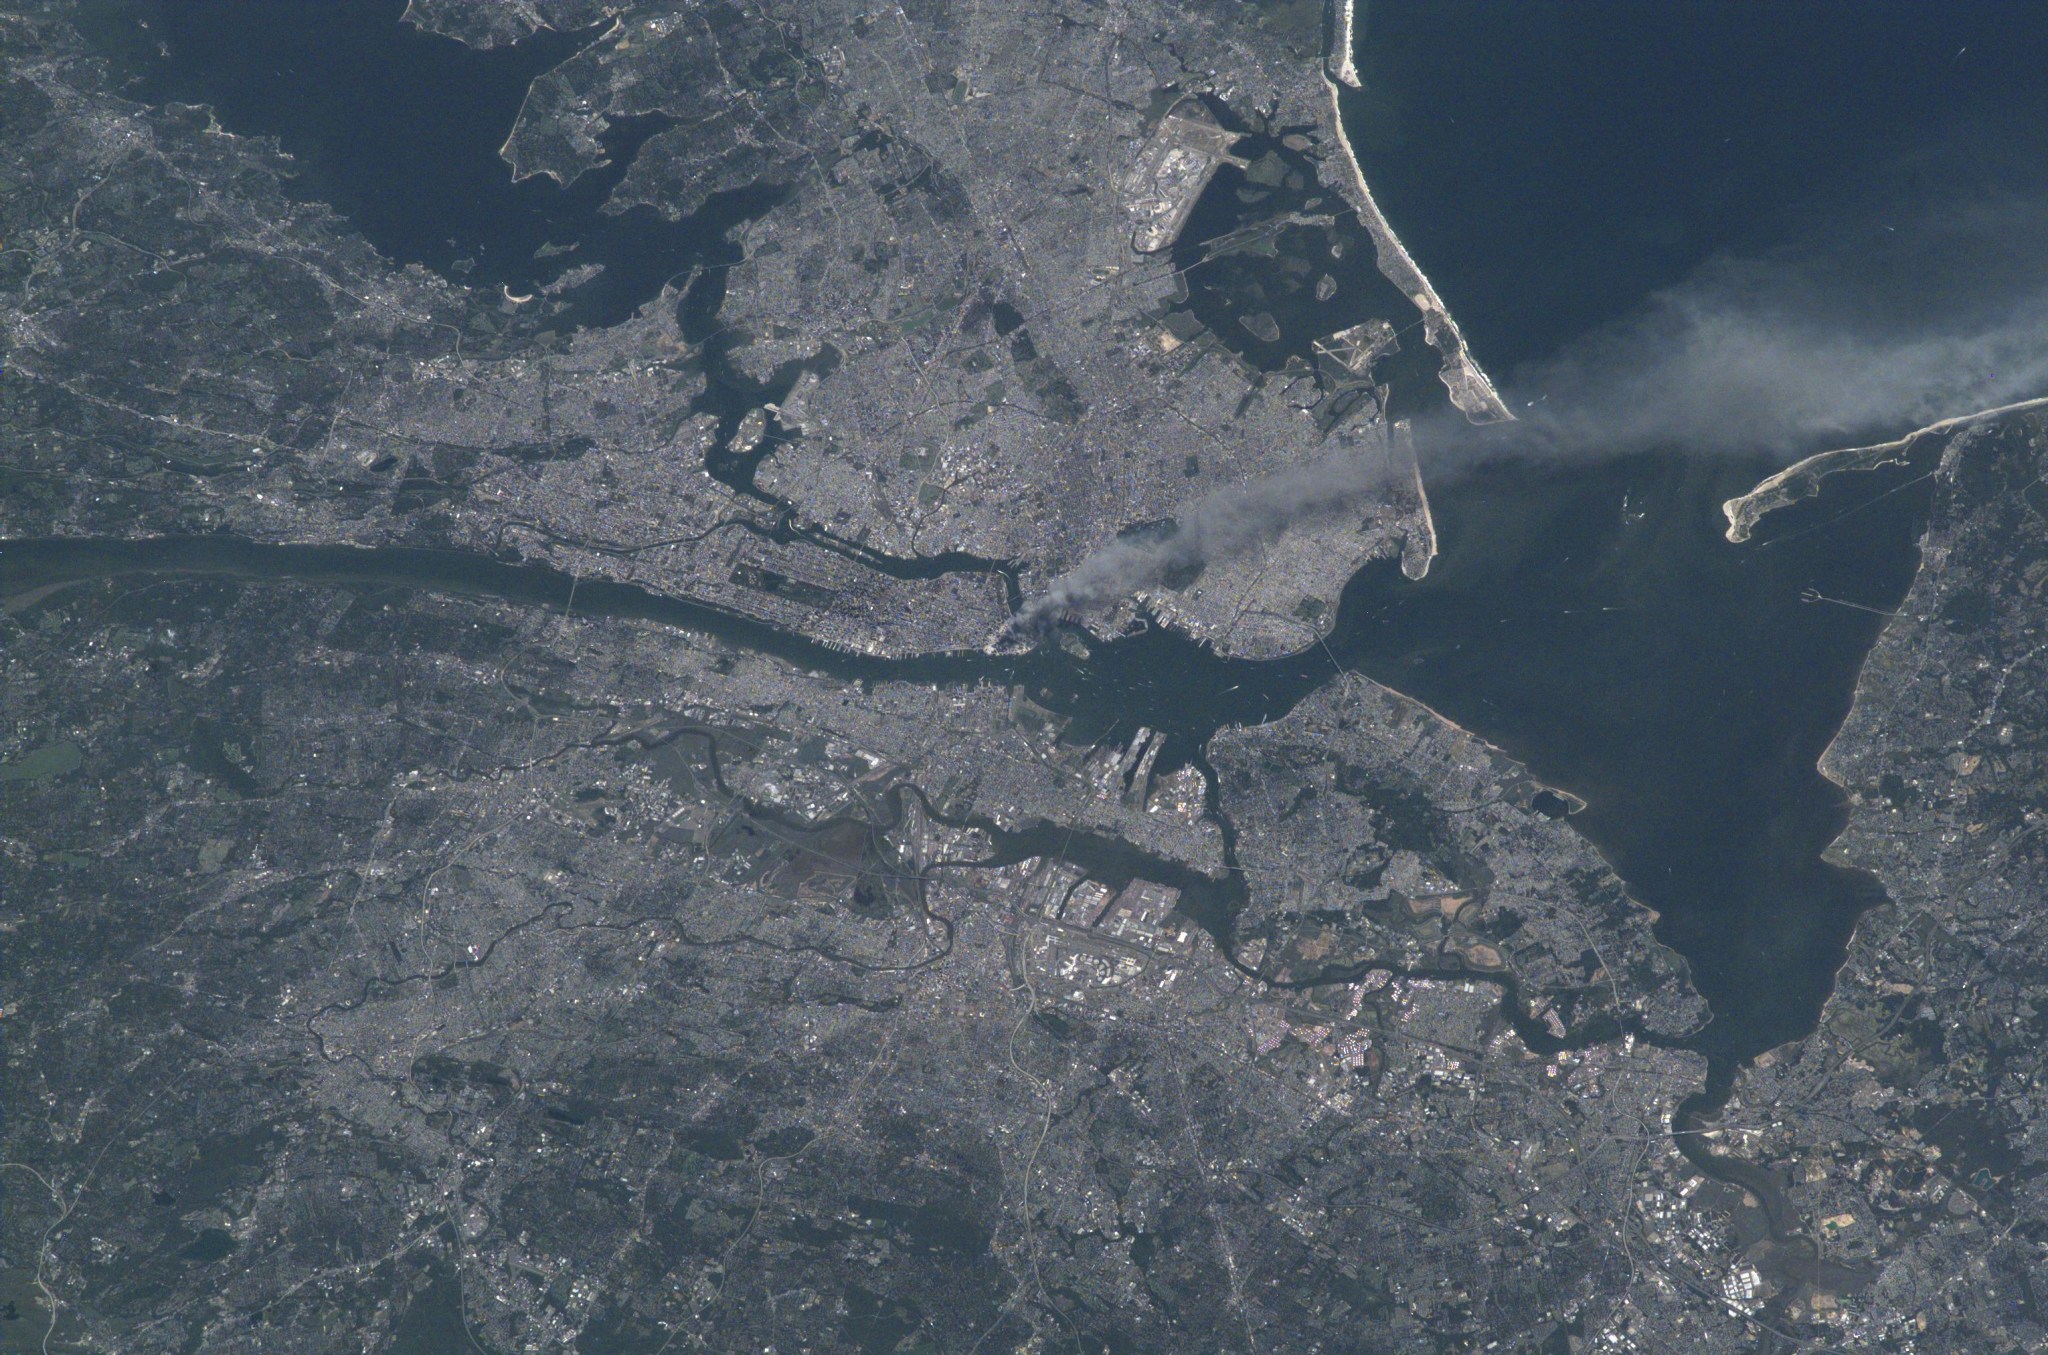 New York City area photographed from orbit on Sept. 11, 2001